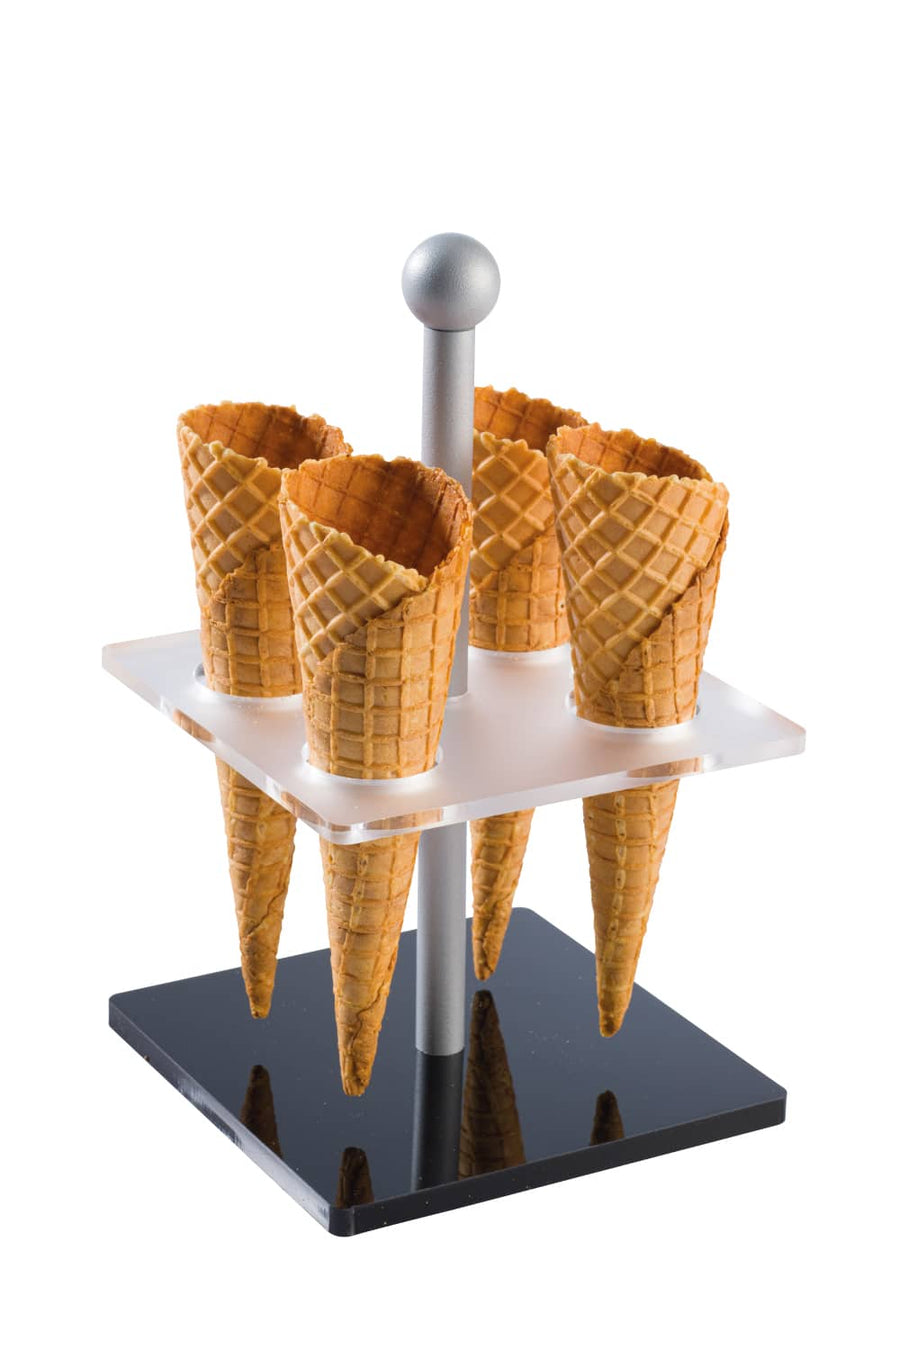 Allows for 4 cones to be held in a beautiful frosted and black design.